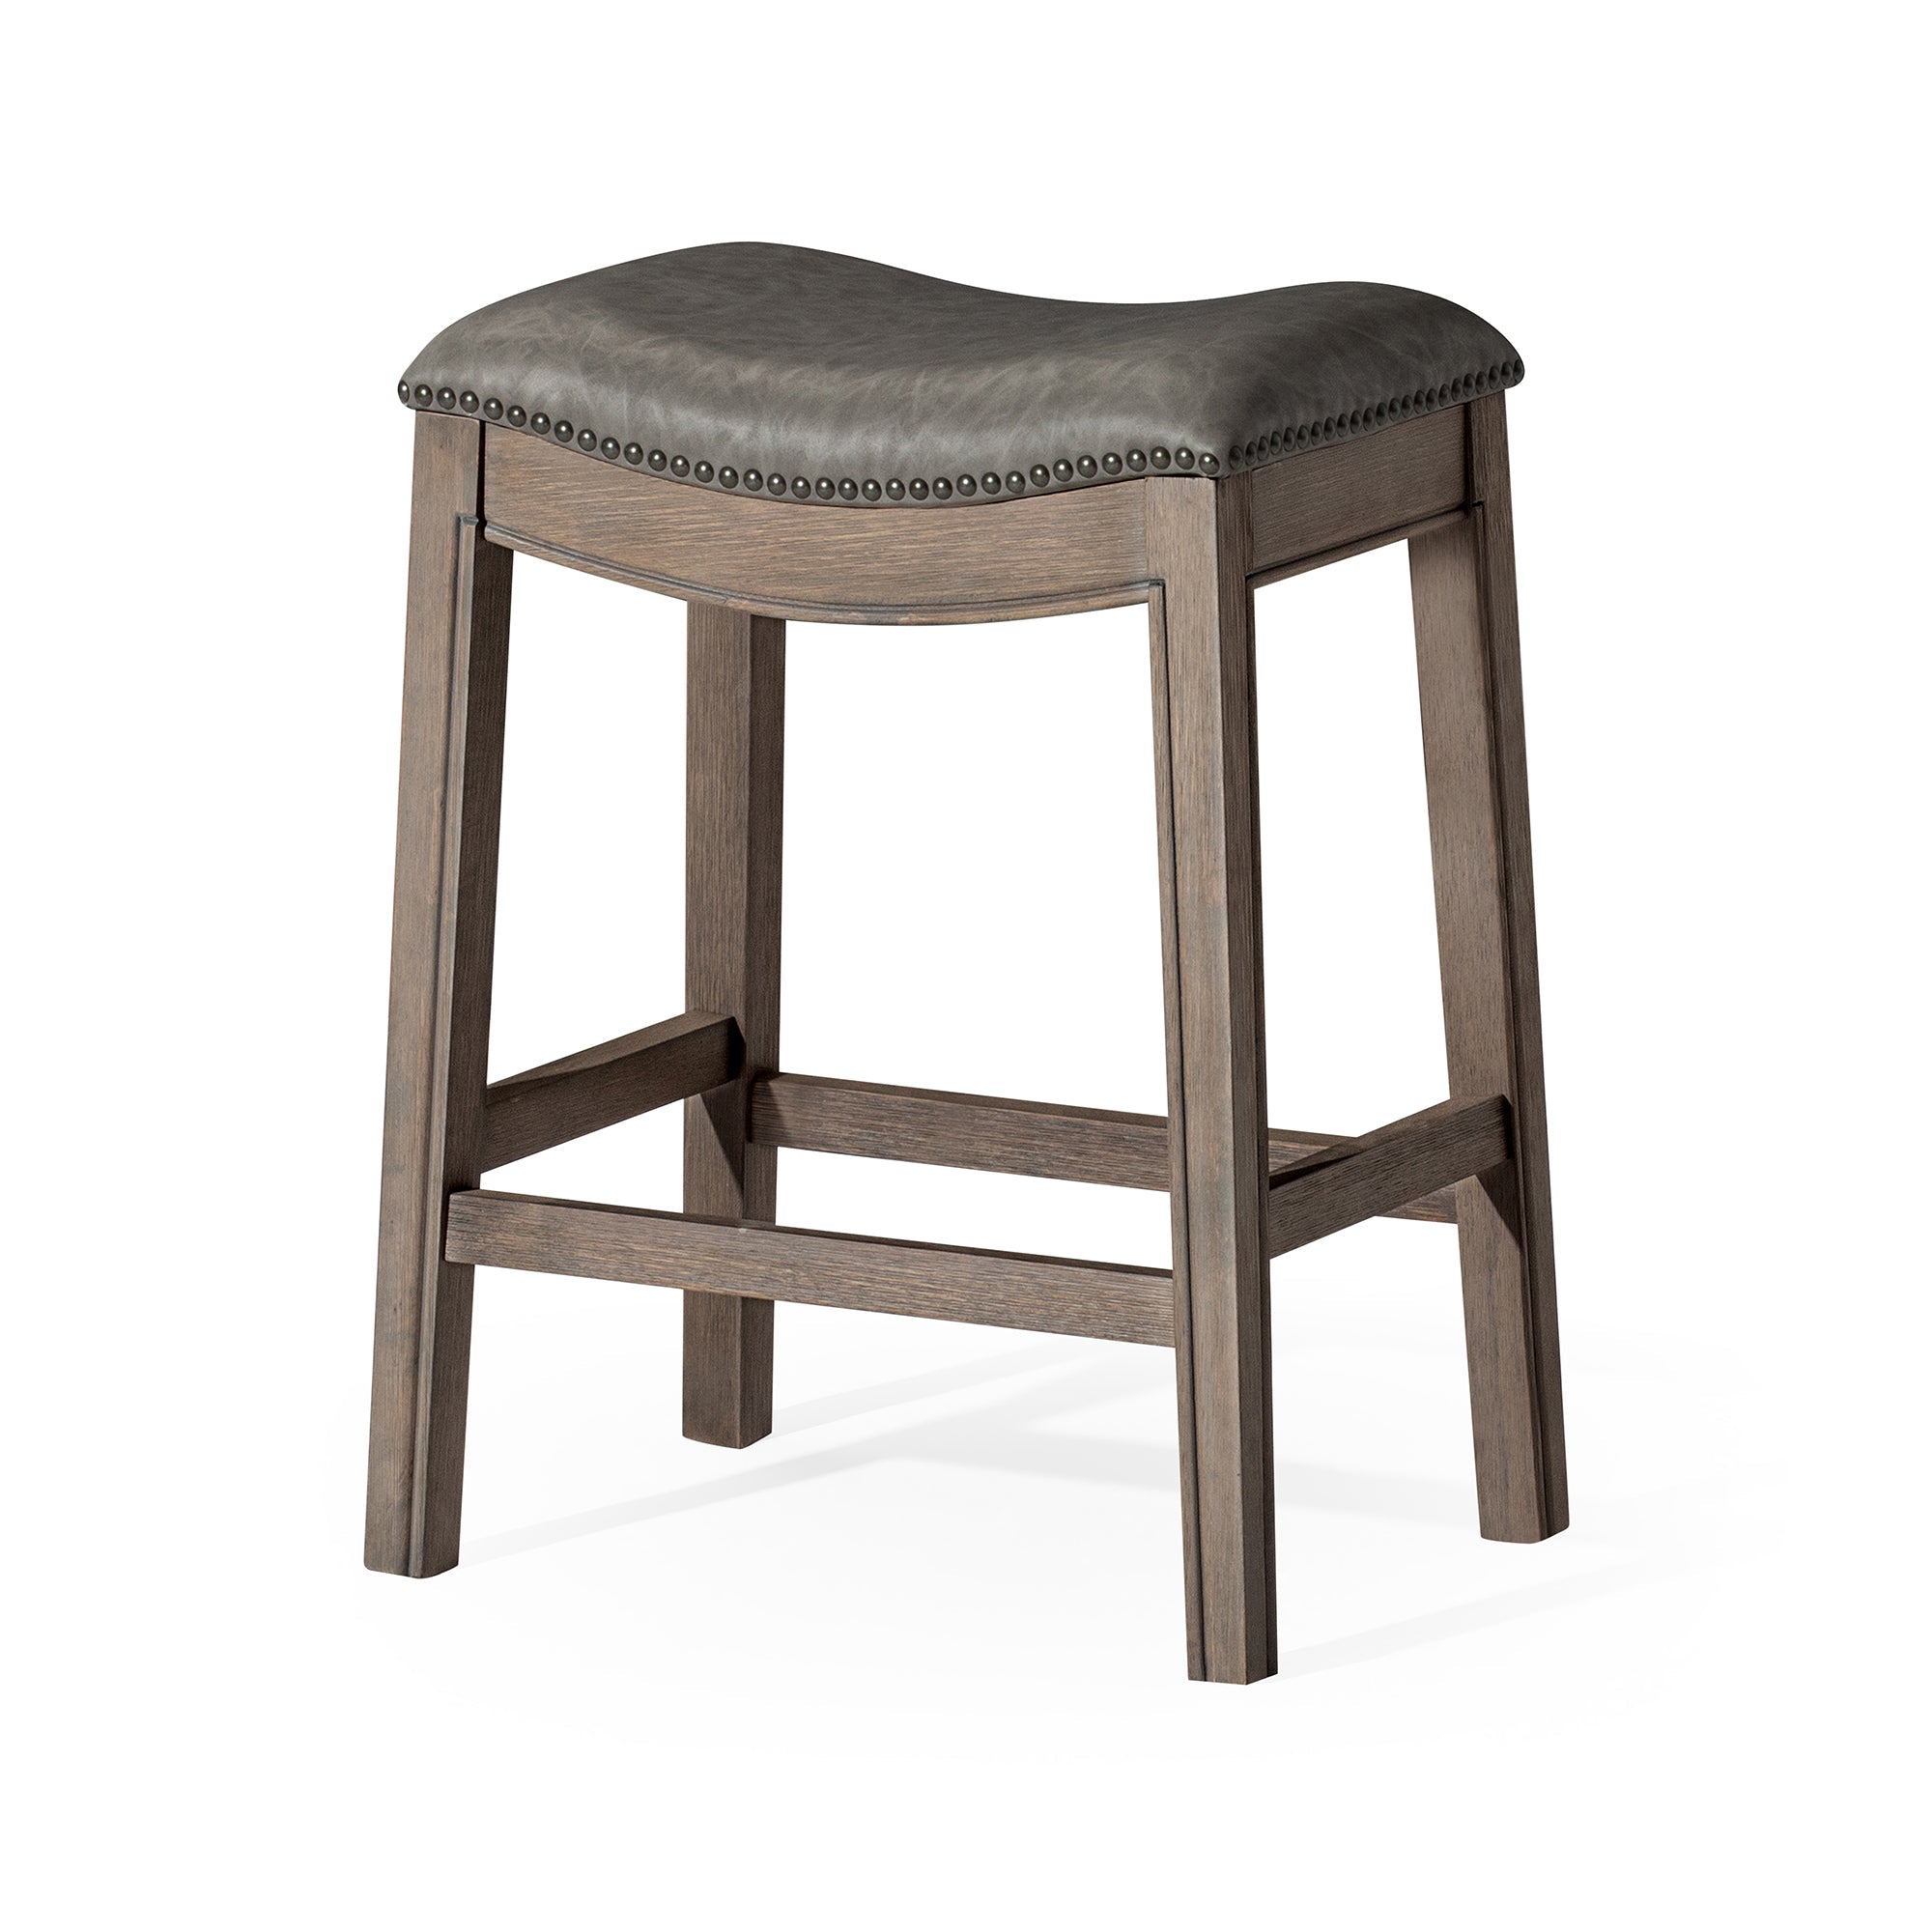 Adrien Saddle Counter Stool in Reclaimed Oak Finish with Ronan Stone Vegan Leather in Stools by Maven Lane